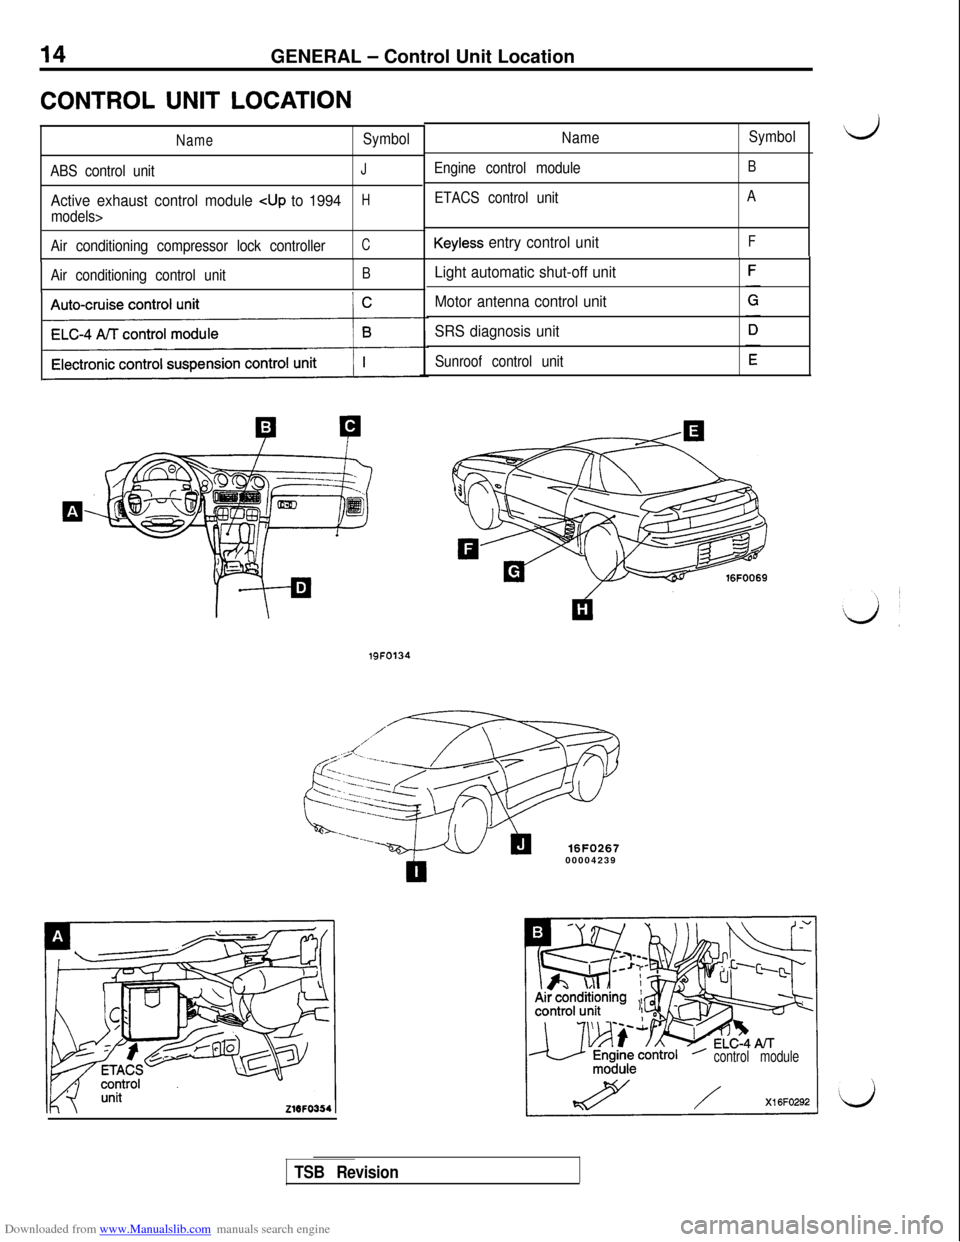 MITSUBISHI 3000GT 1996 2.G User Guide Downloaded from www.Manualslib.com manuals search engine 14GENERAL - Control Unit Location
CONTROL UNIT LOCATION
NameSymbol
ABS control unit
J
Active exhaust control module cup to 1994H
models>
Air co